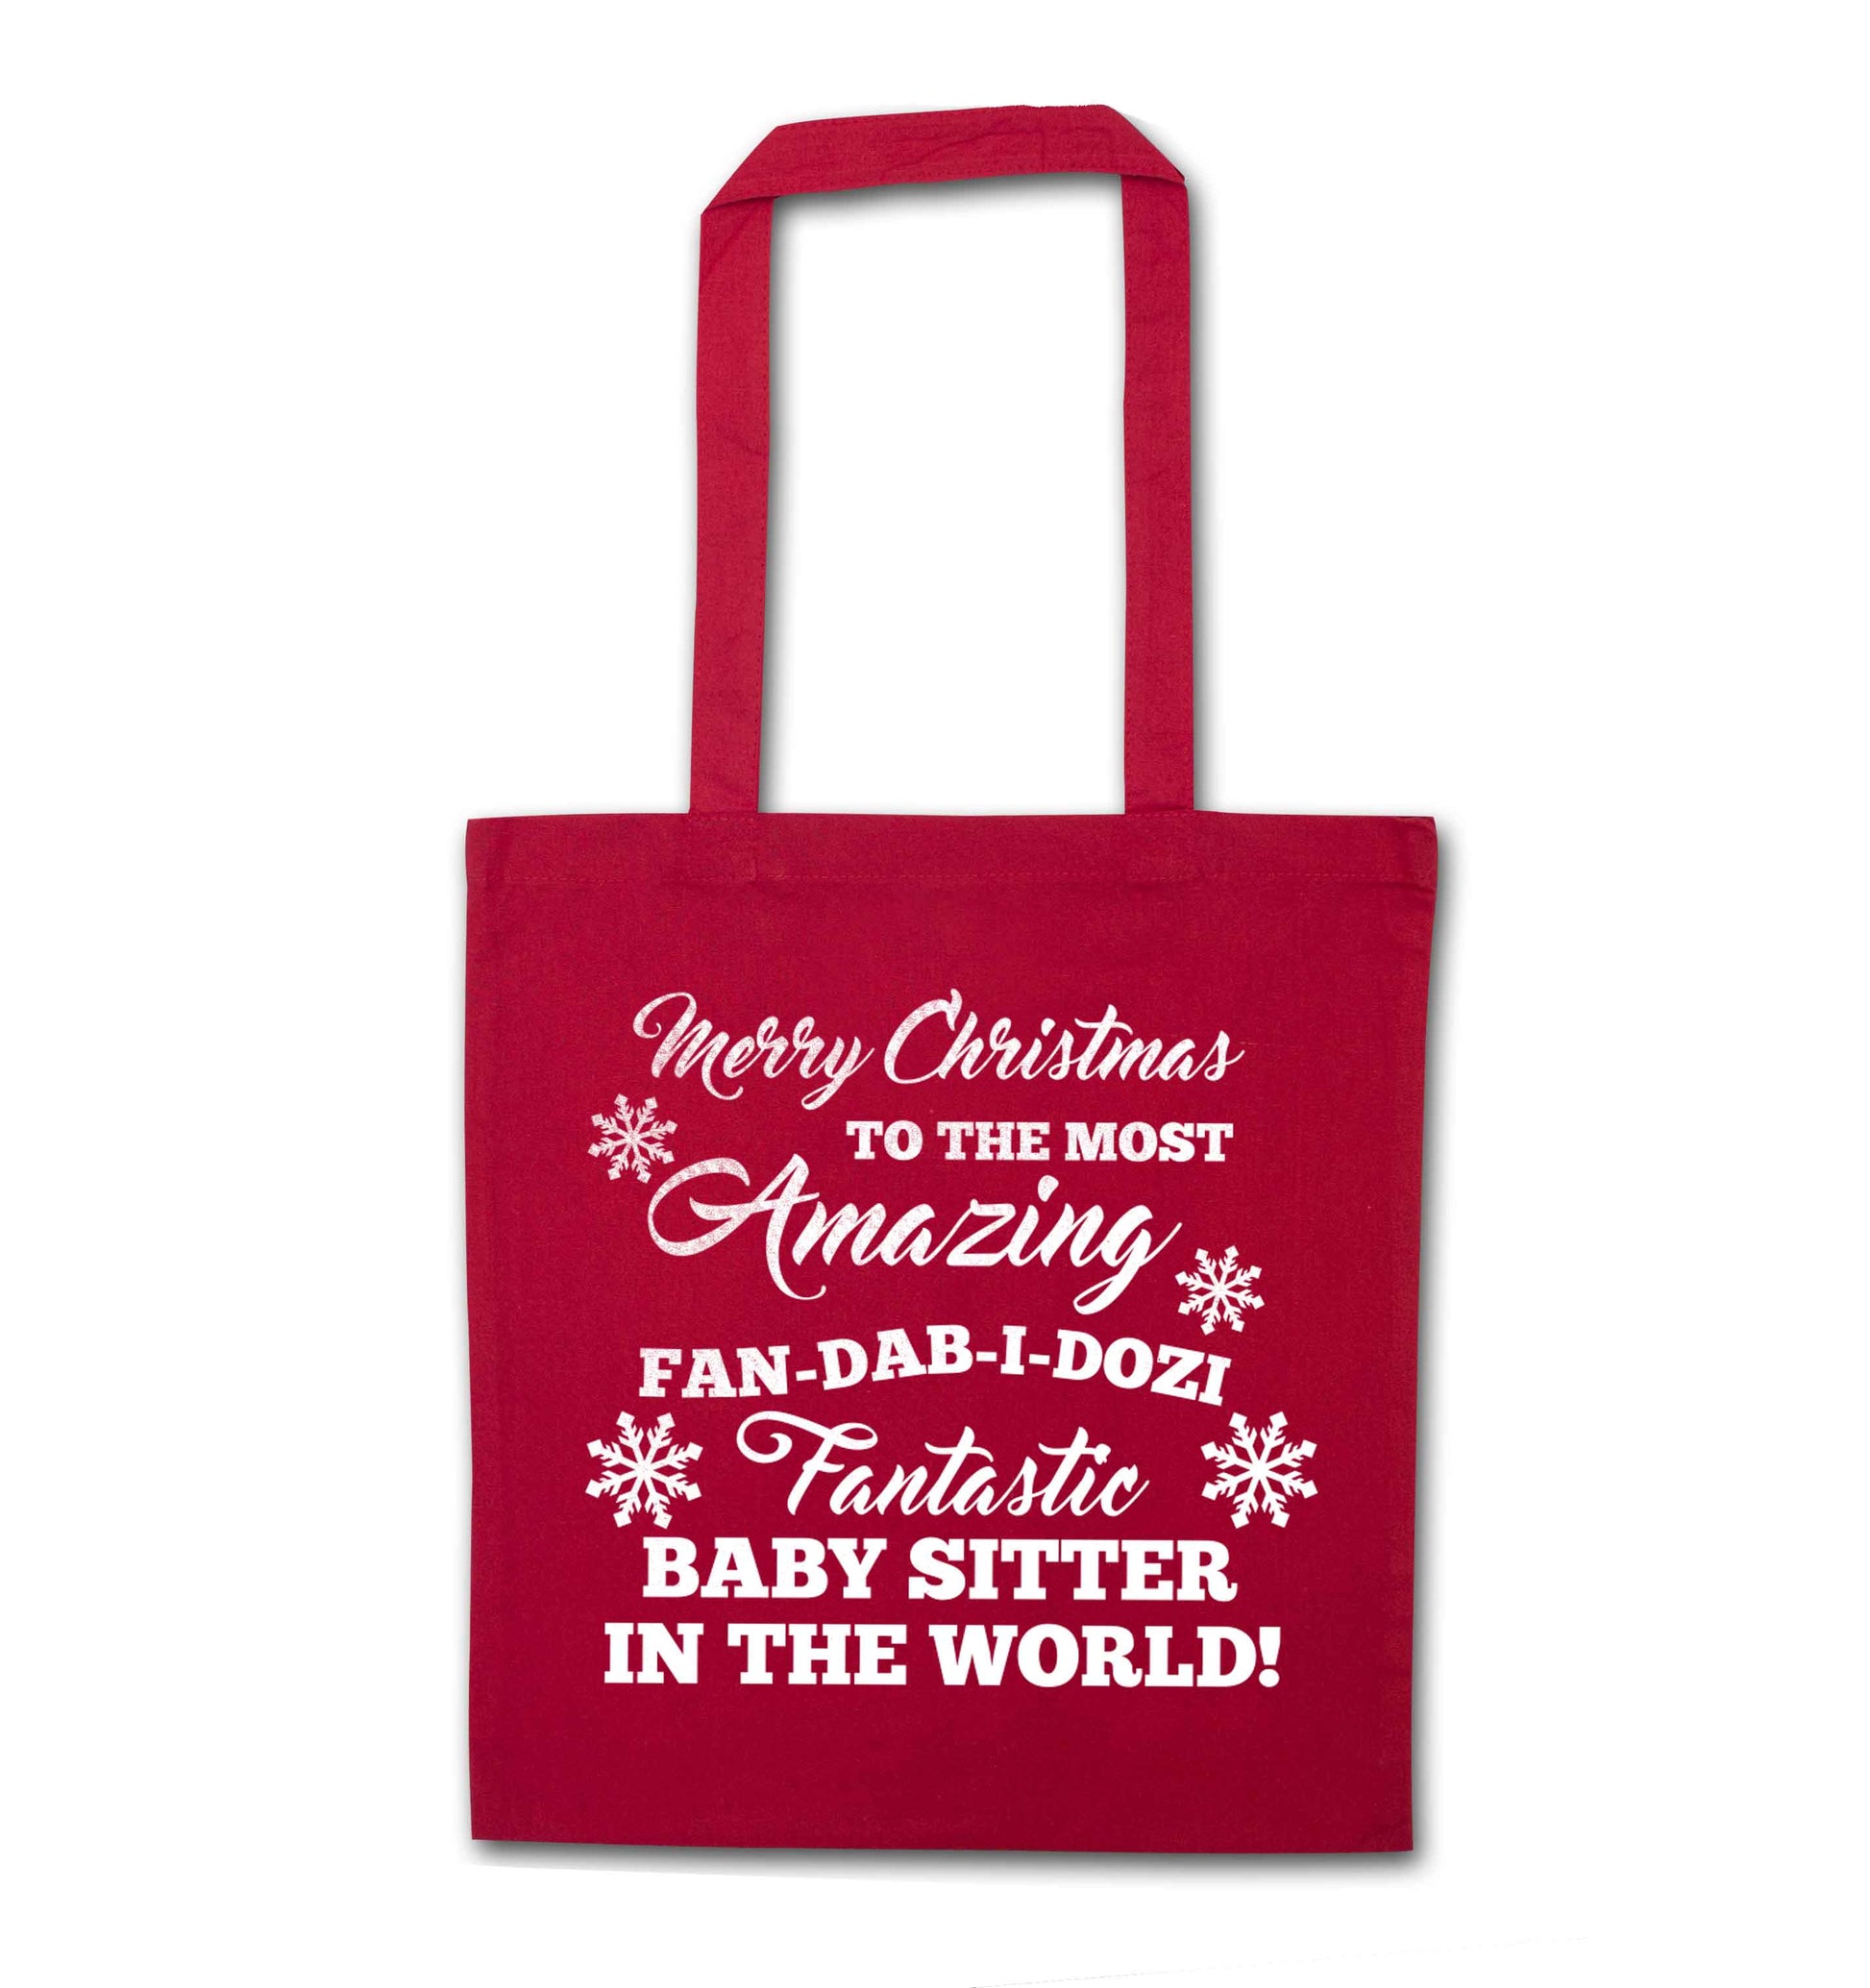 Merry Christmas to the most amazing fan-dab-i-dozi fantasic baby sitter in the world red tote bag